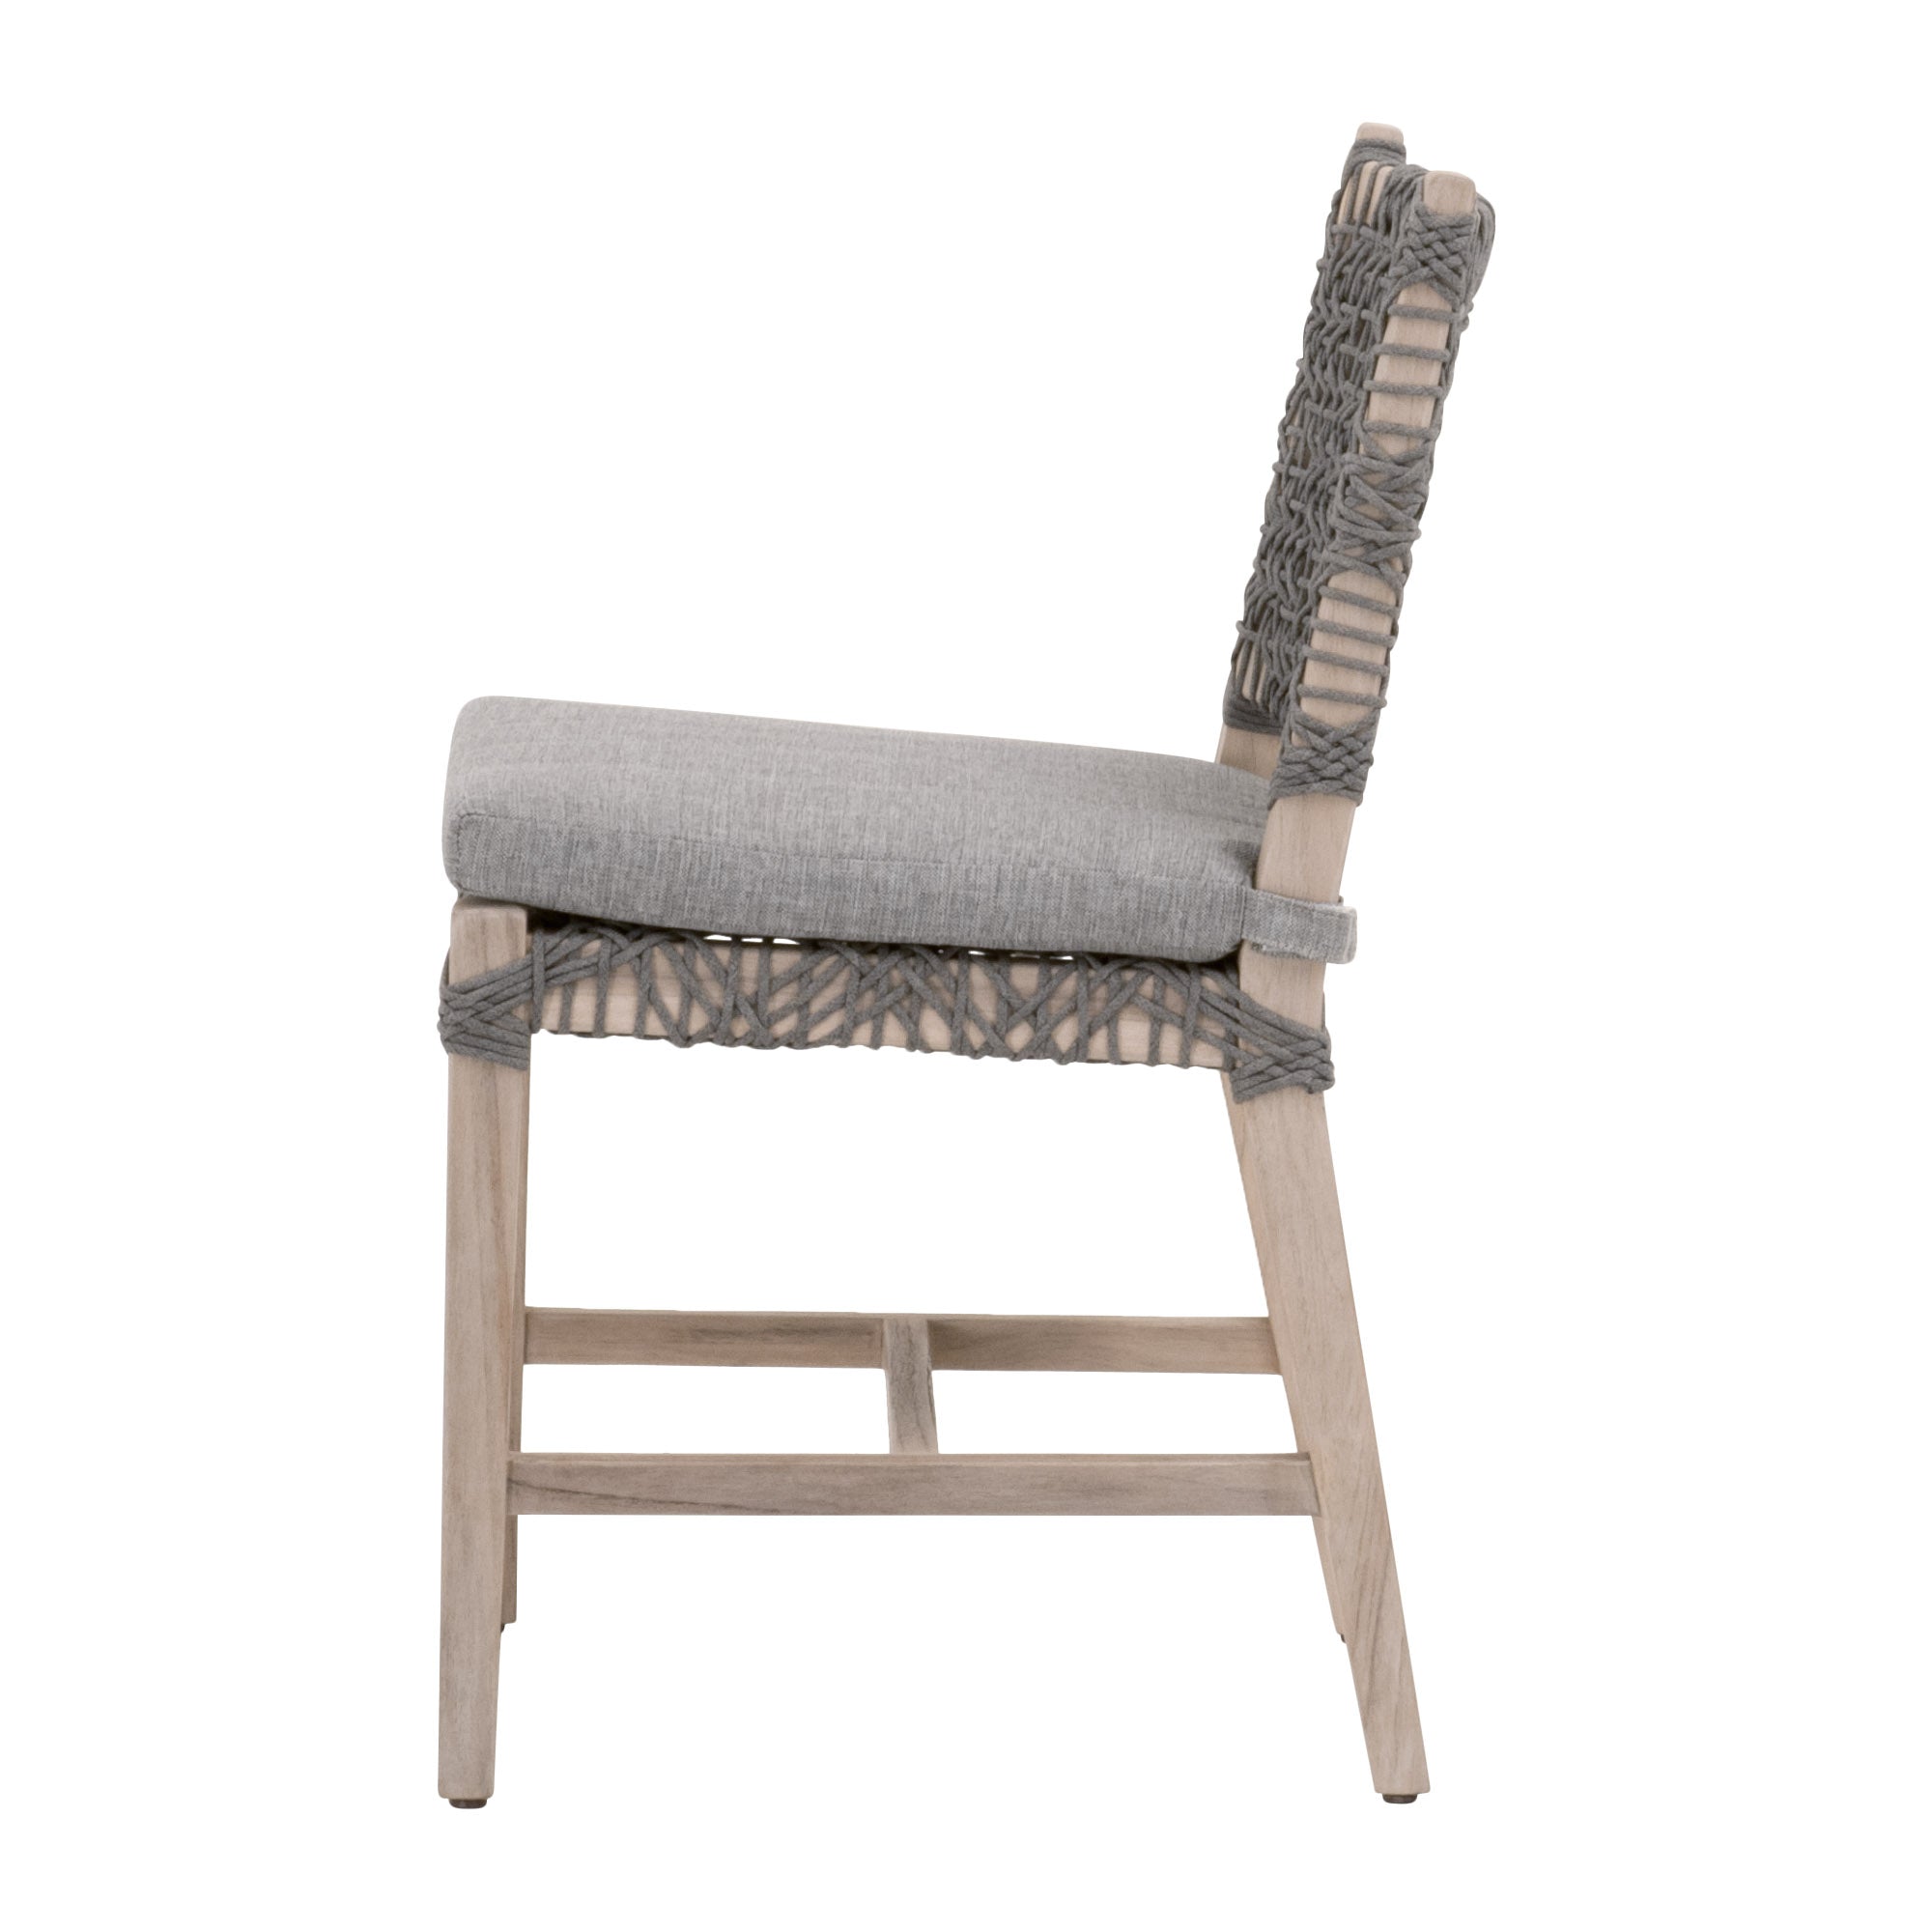 Clovelly Outdoor Dining Chair, set of 2